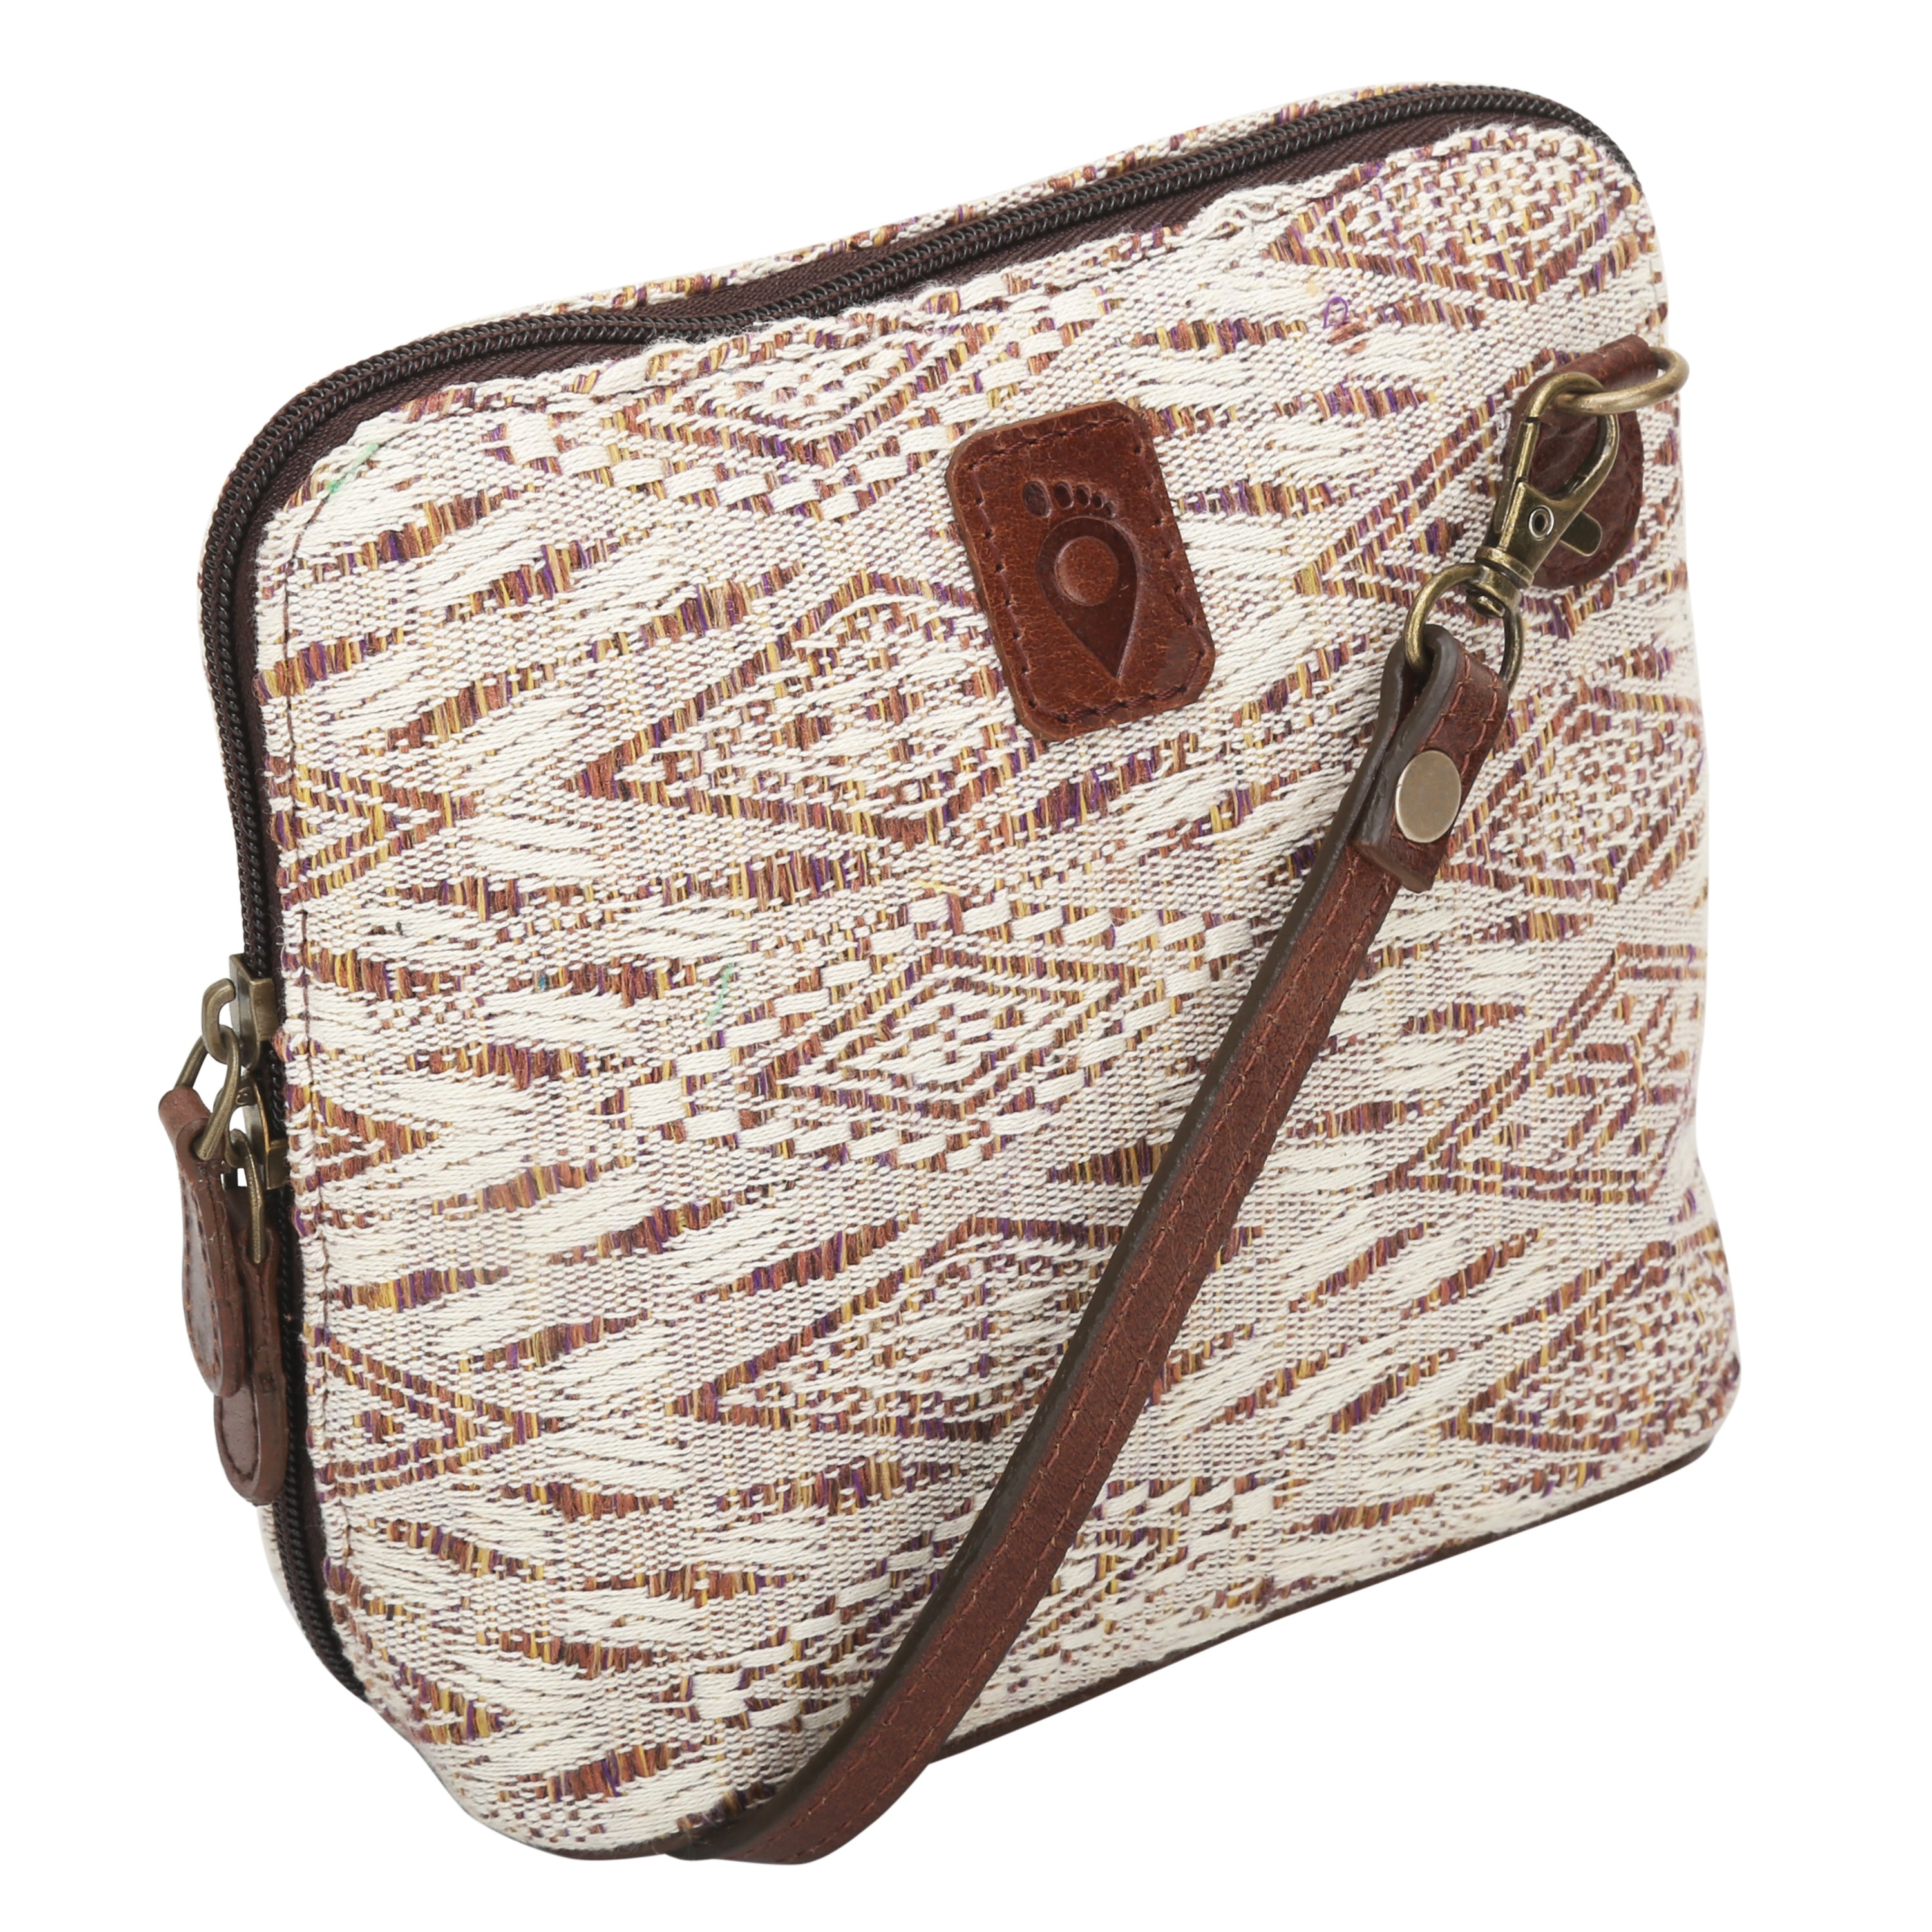 Woven Patterned Sling Bag | Brown and Cream